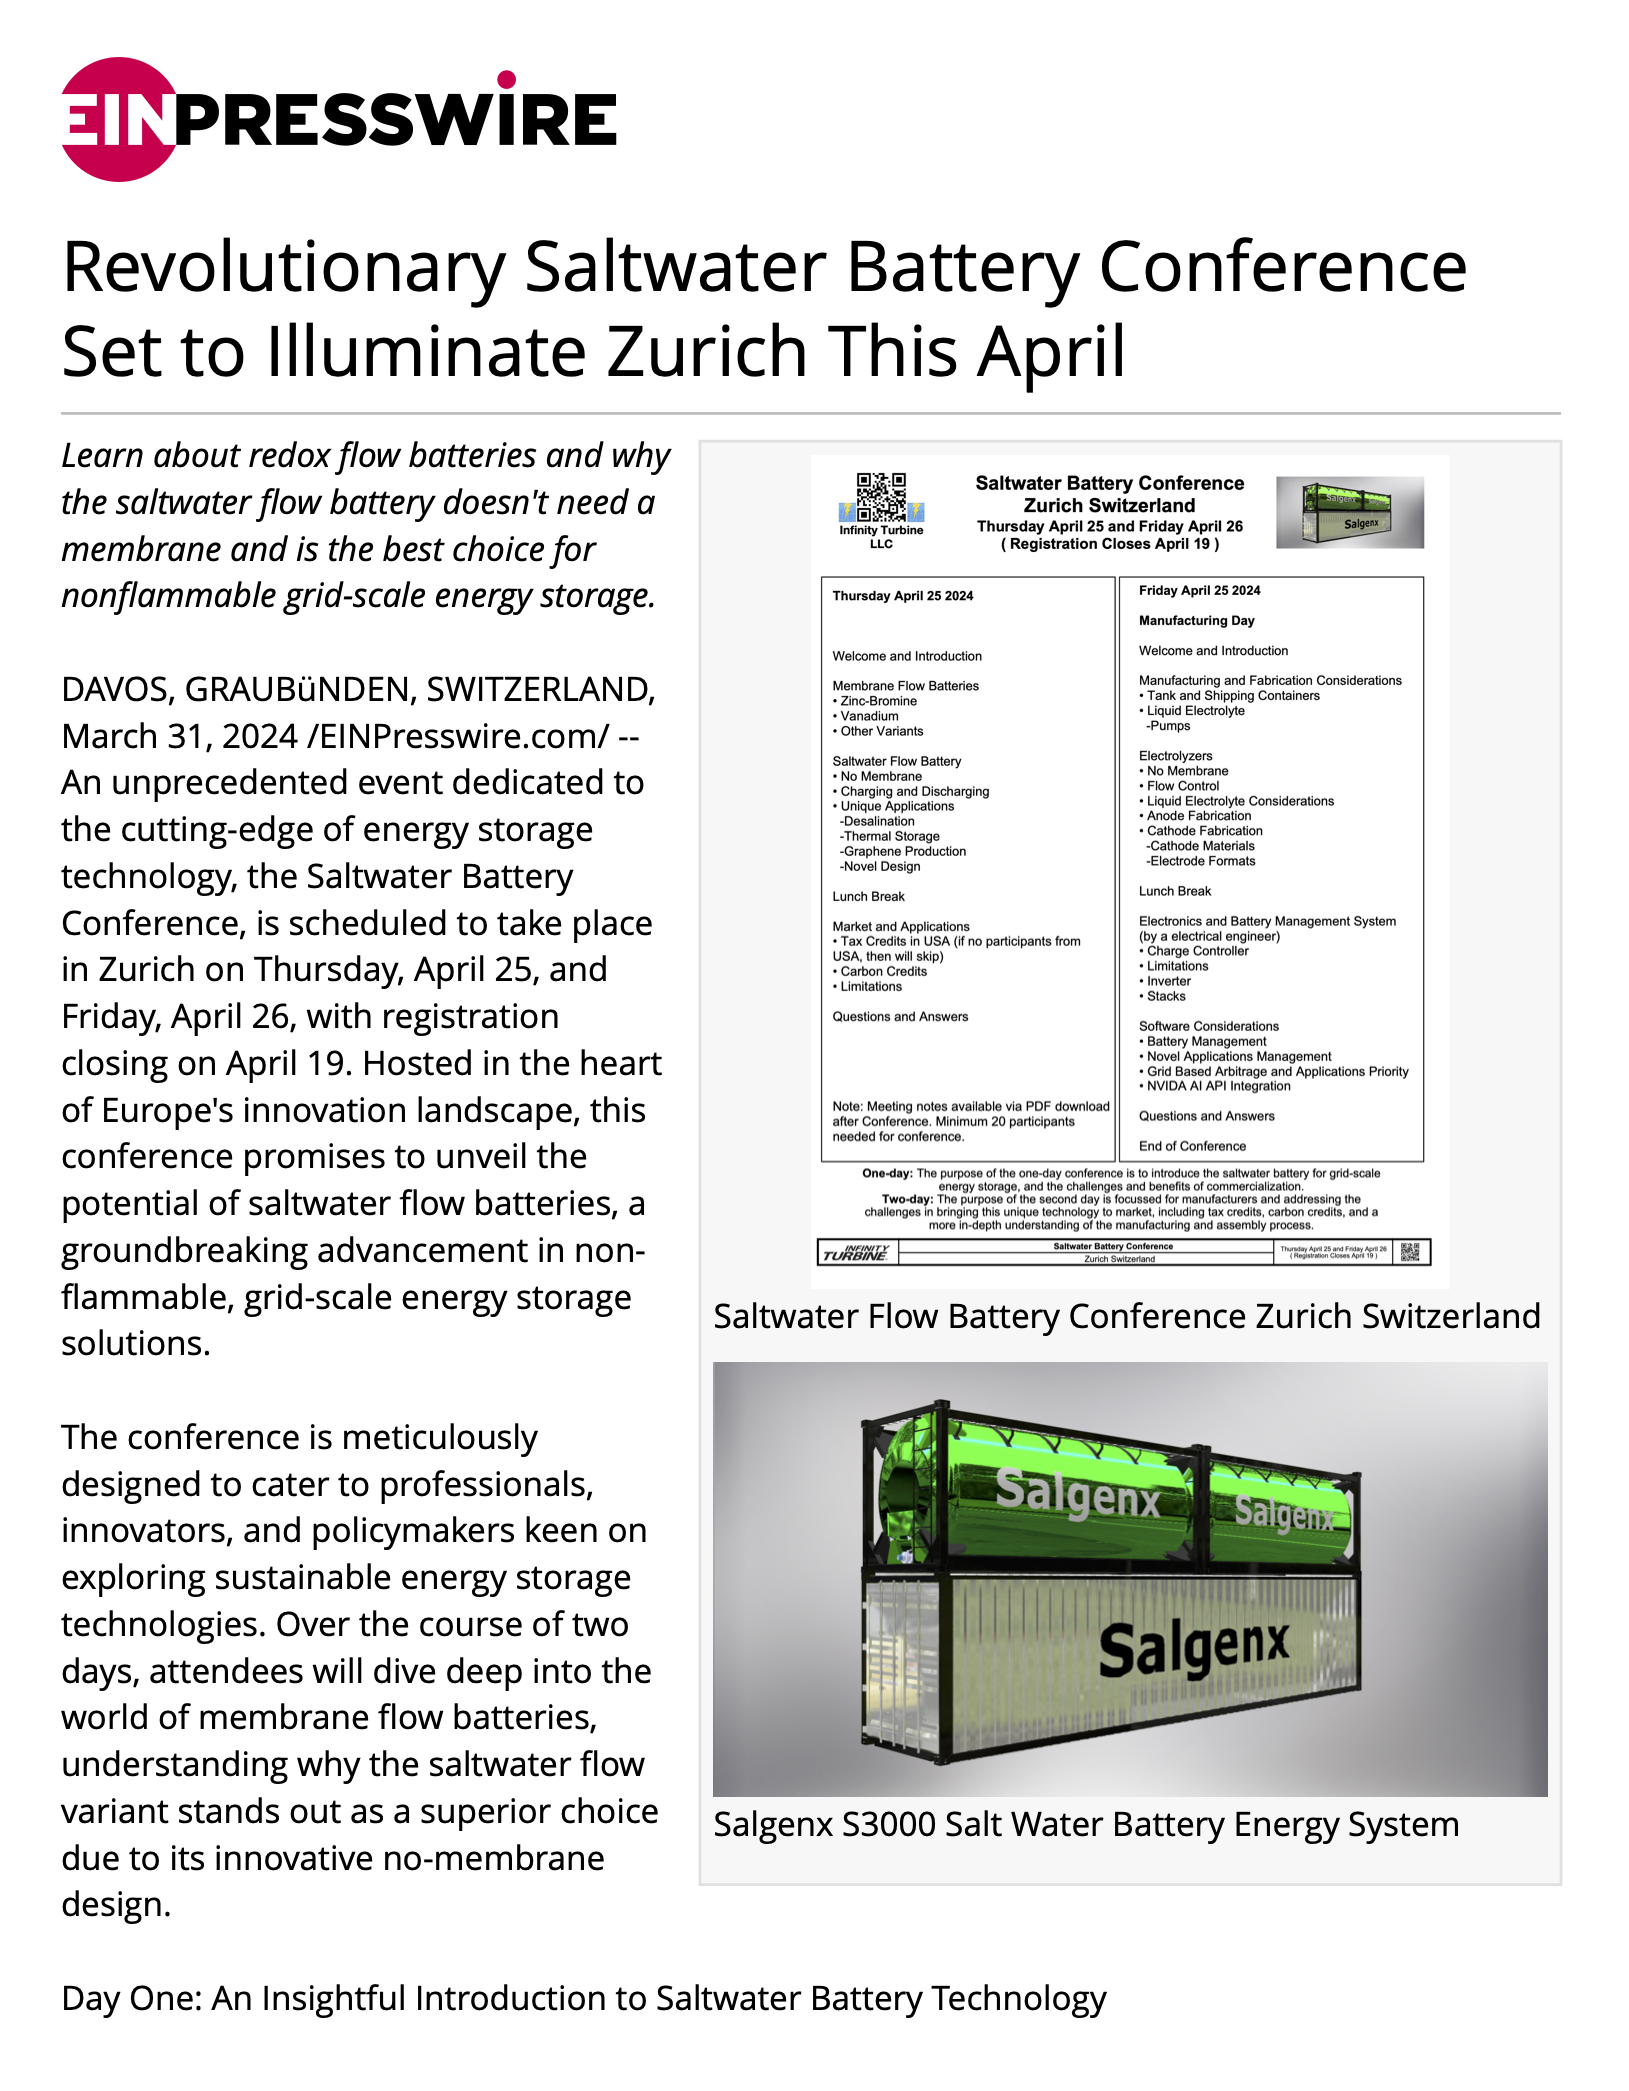 Revolutionary Saltwater Battery Conference Set to Illuminate Zurich This April